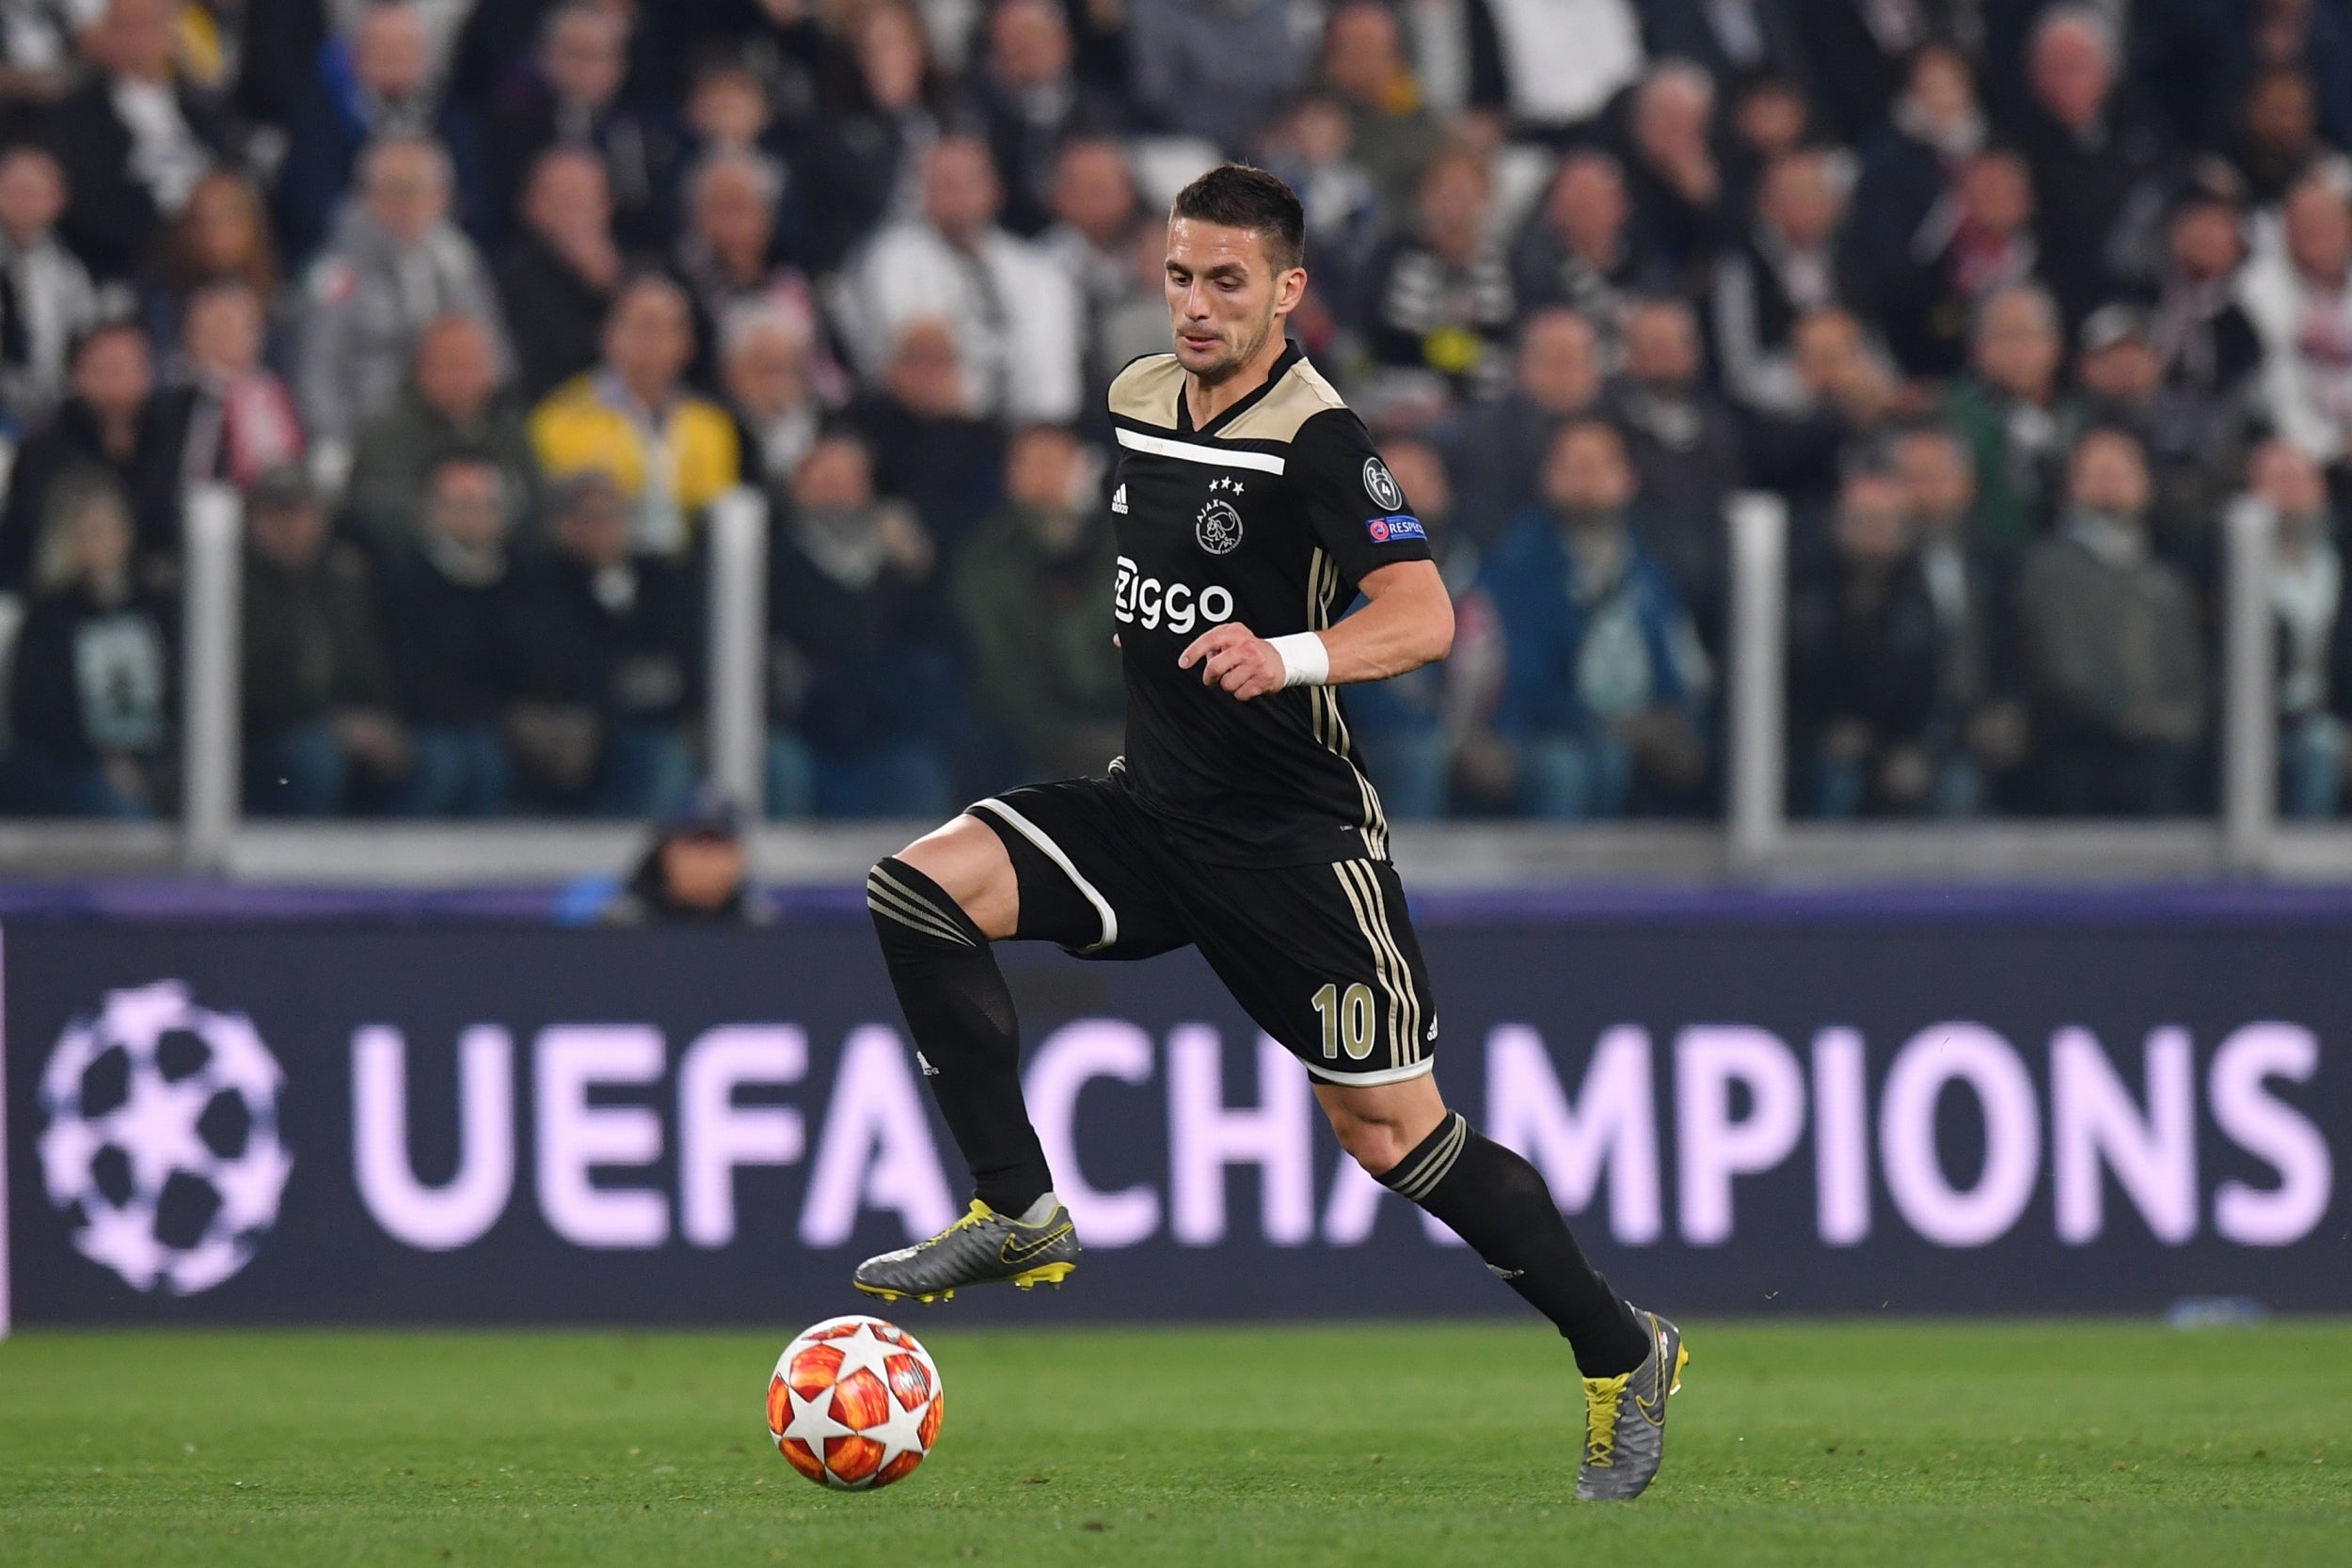 Tadic has starred for Ajax